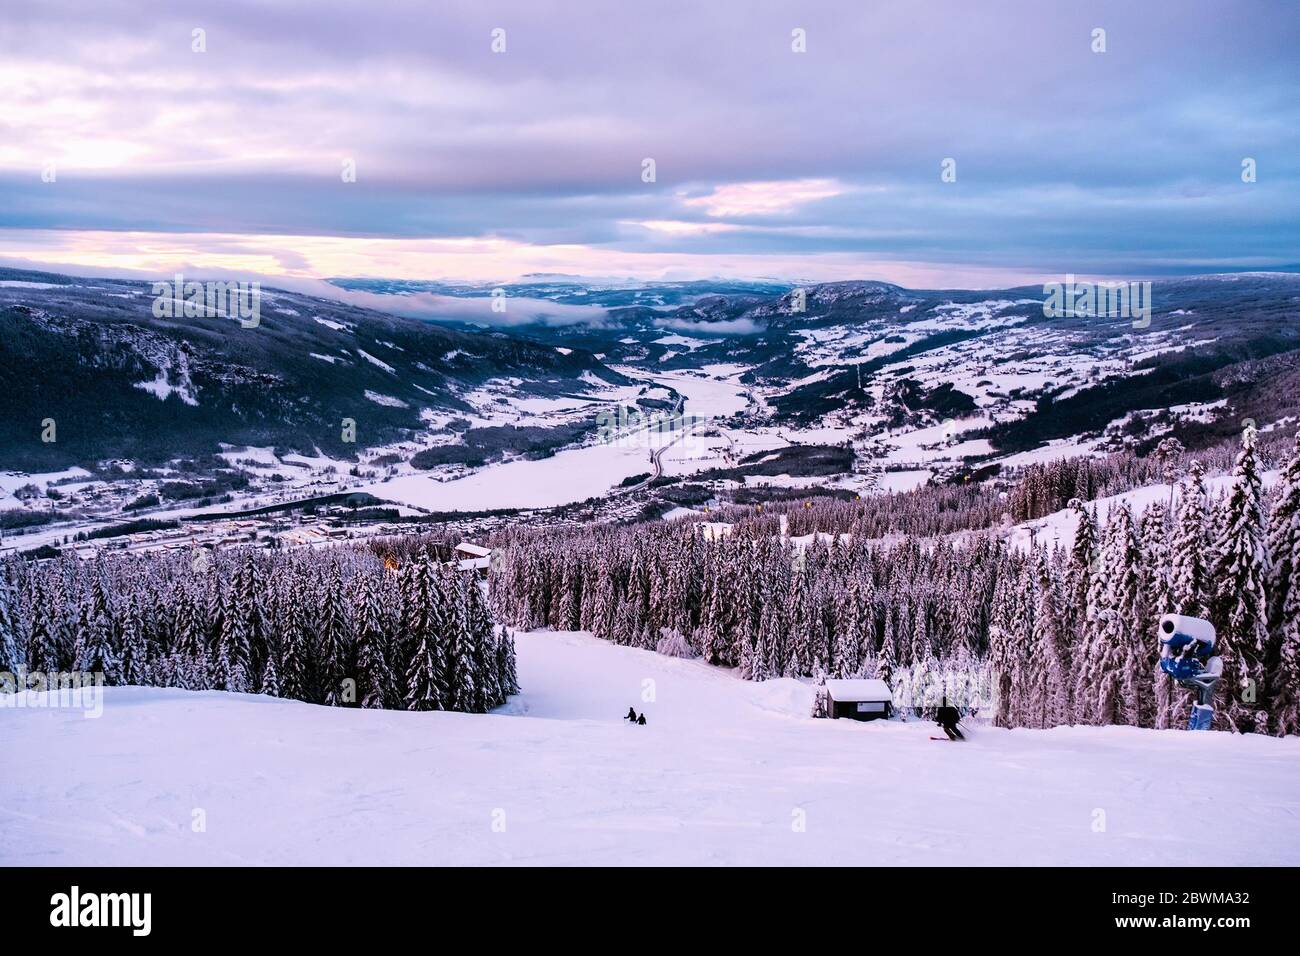 Hafjell, Norway. Aerial view of ski resort Hafjell in Norway with skiers going down the snowy slopes in winter with mountains Stock Photo